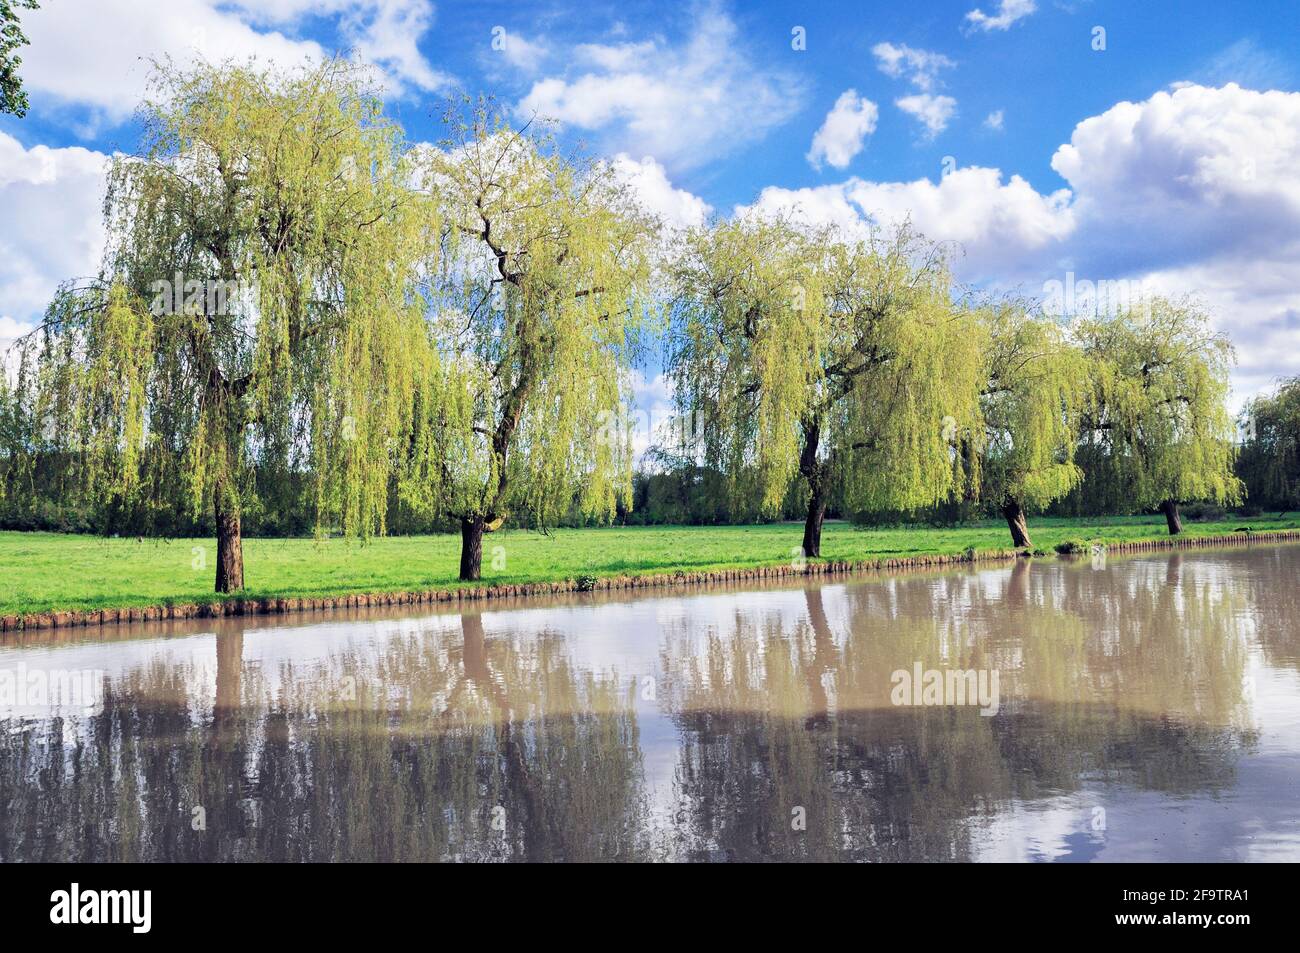 Weeping Willow trees on the banks of the River Wey in spring sunshine, Guildford, Surrey, England, UK Stock Photo